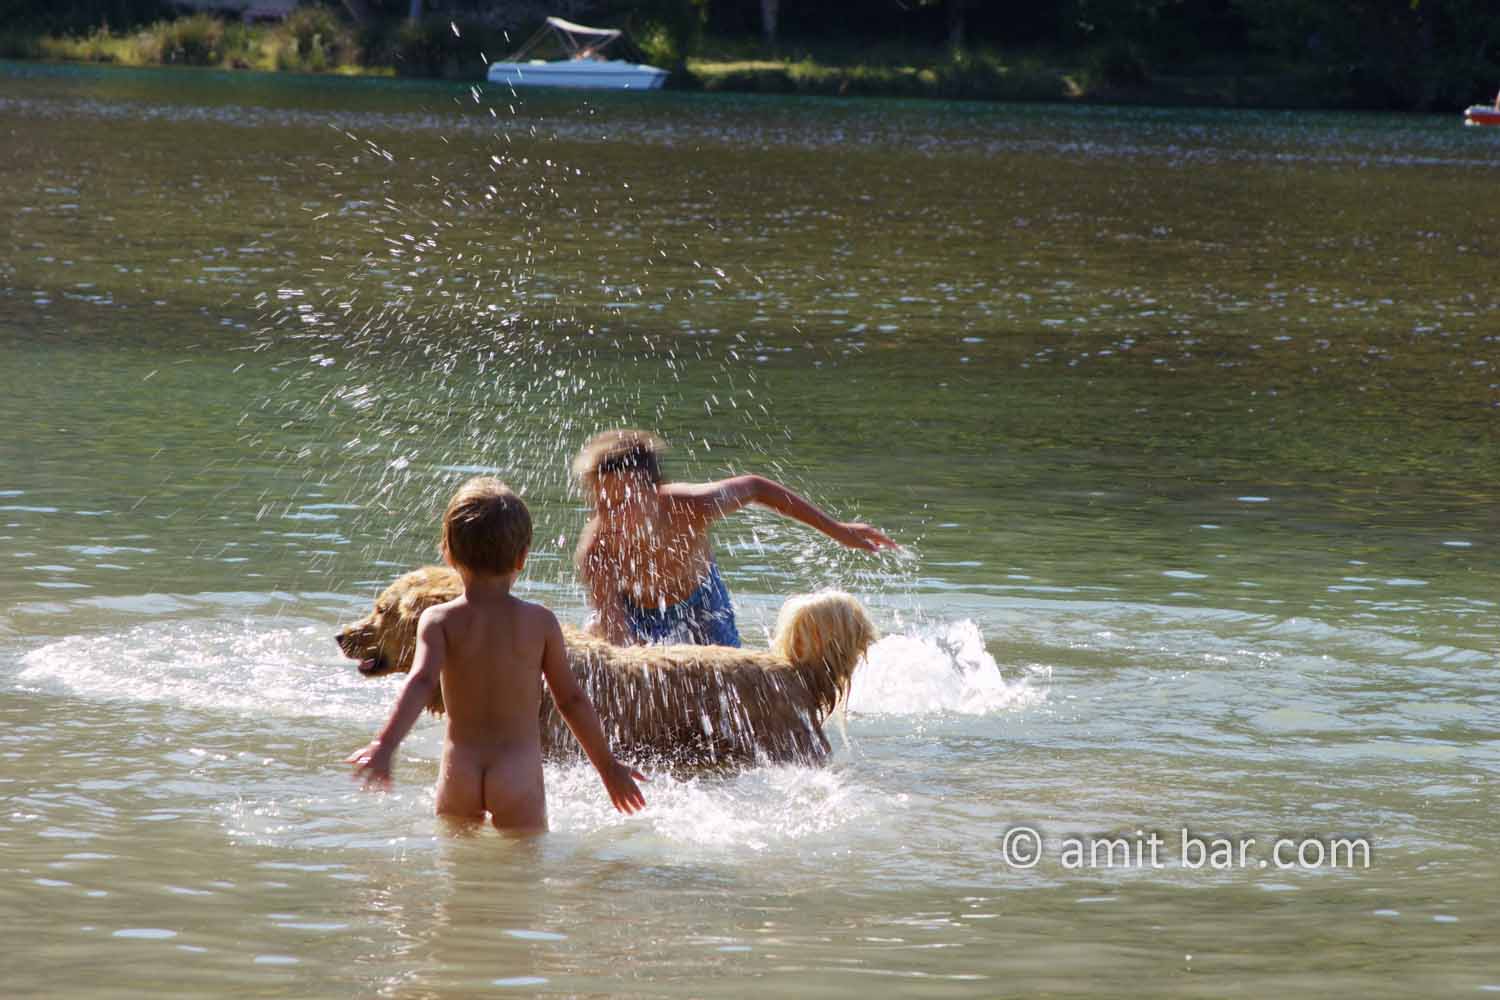 Washing a dog: Two children are washing their dog in a river